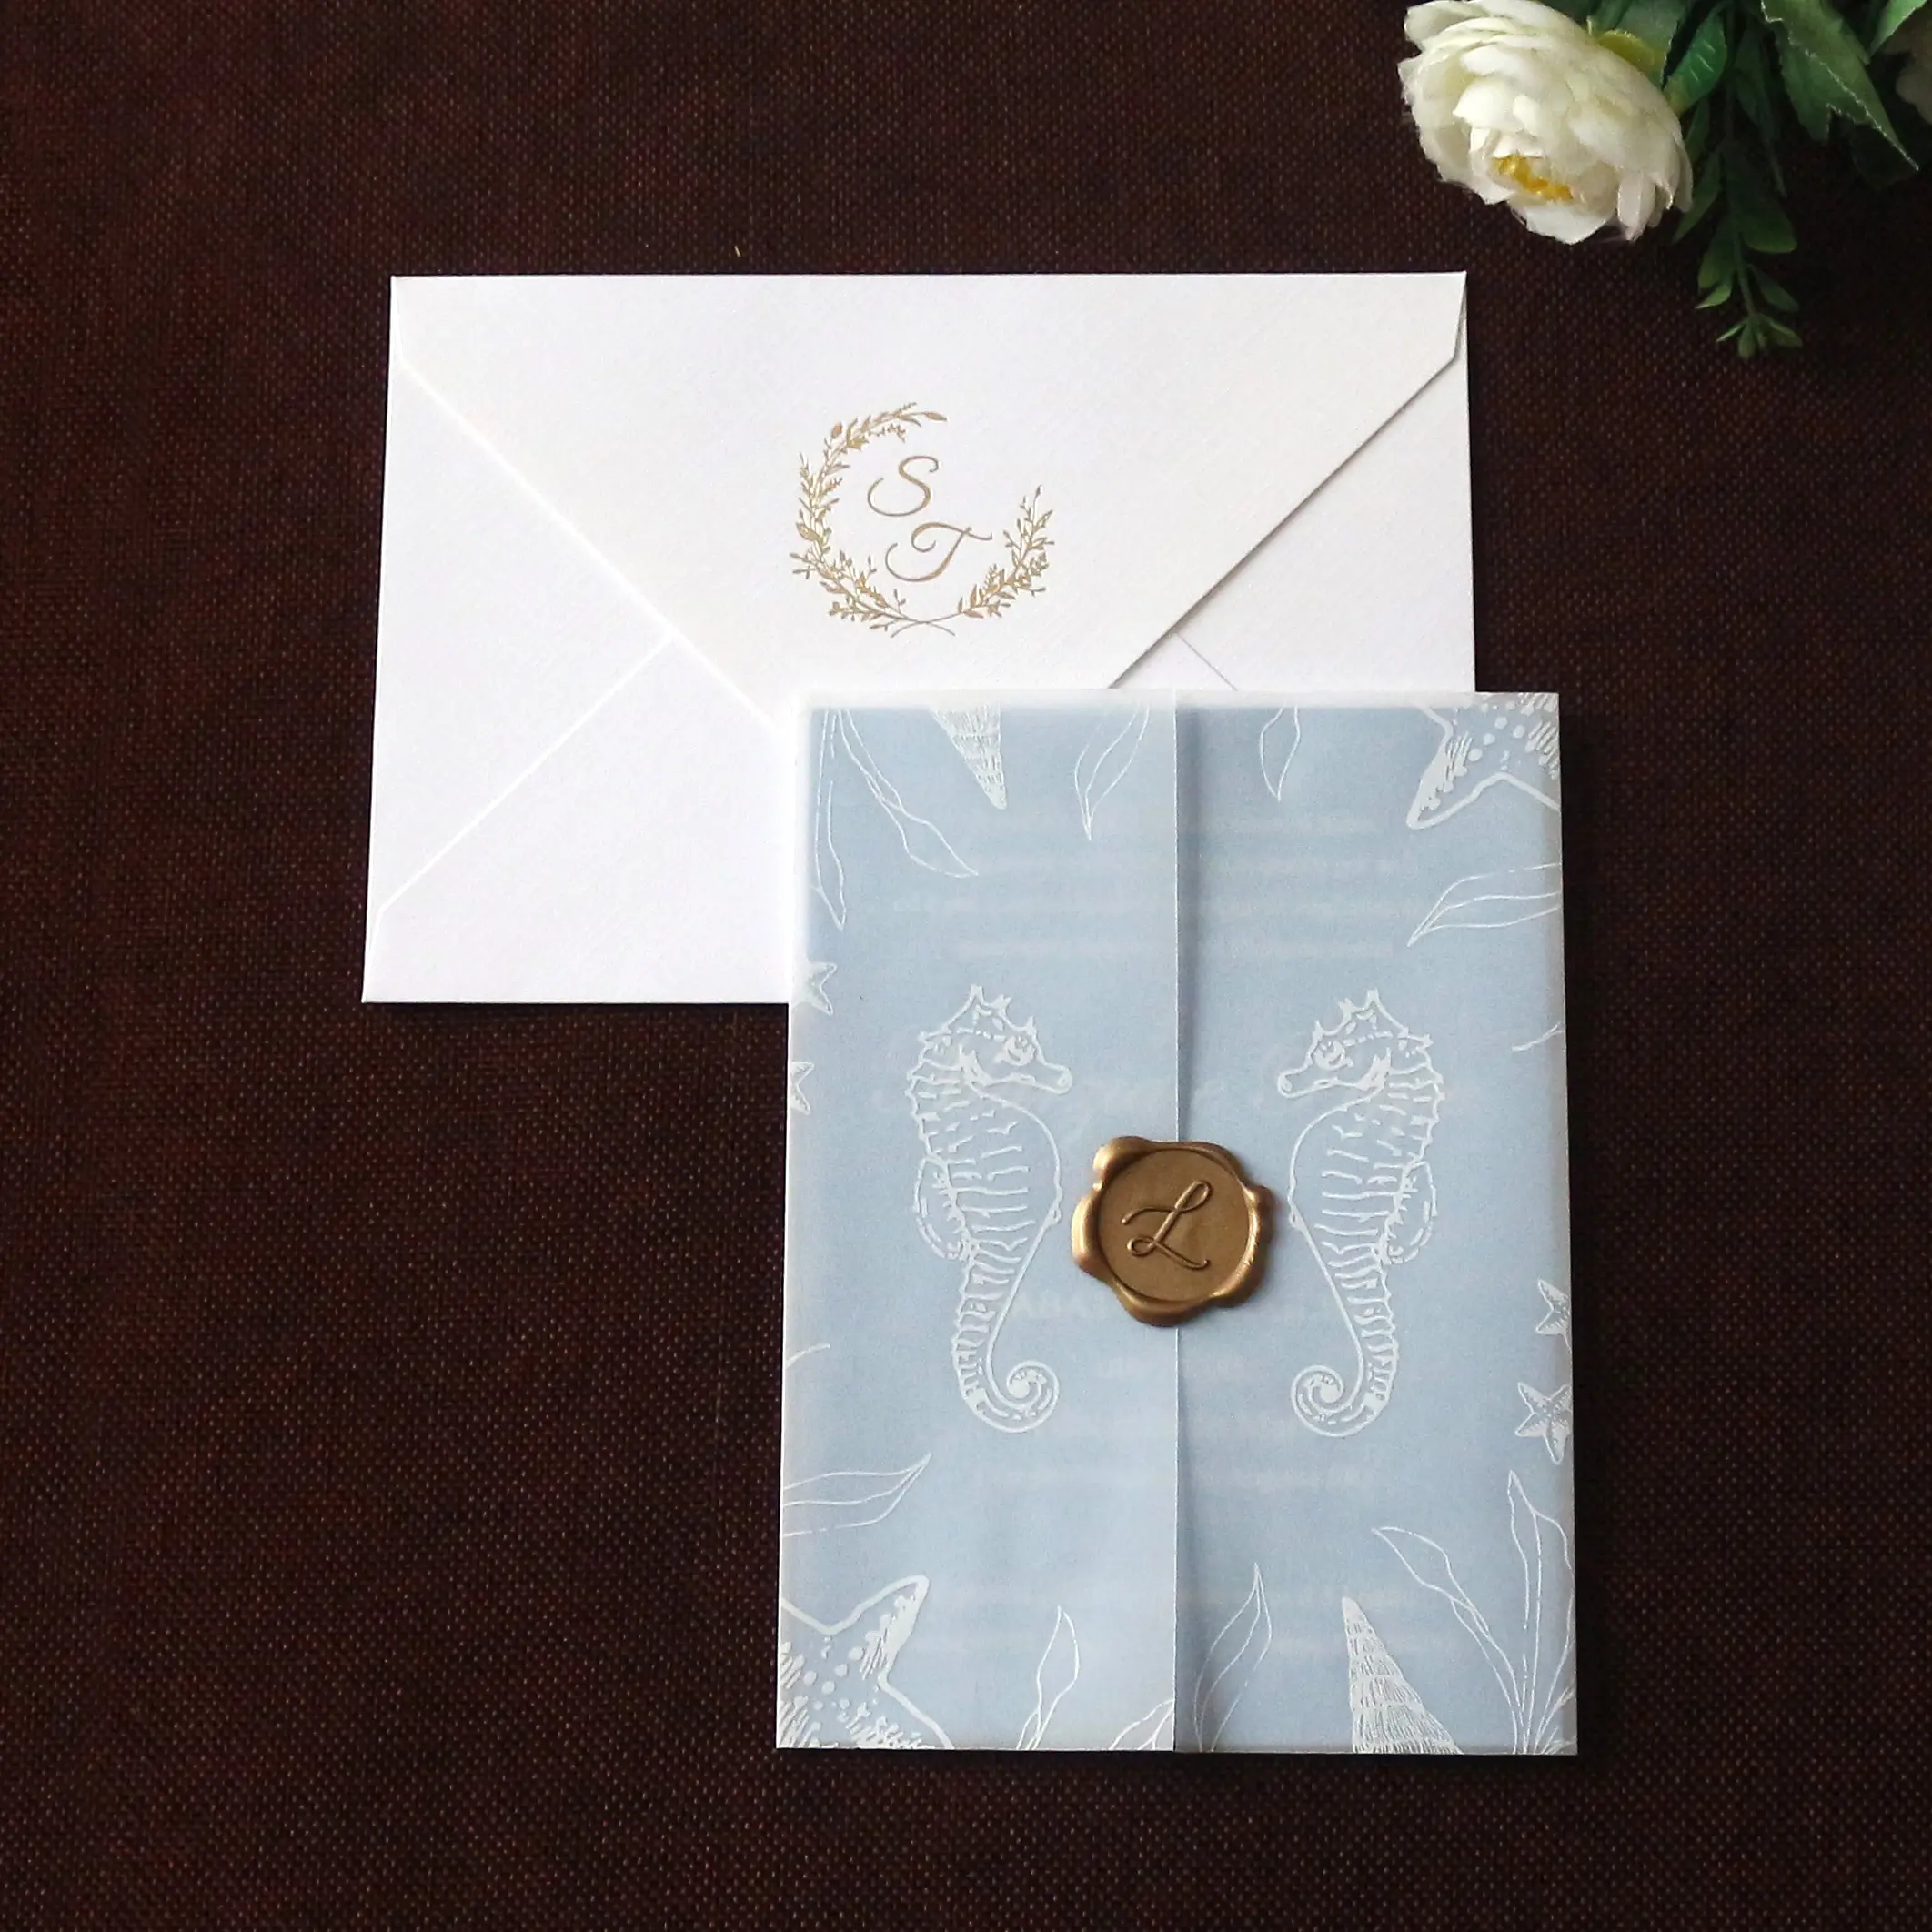 Sea Horse Printing Light Blue Cotton Paper Wedding Invitation Card With Vellum Cover And Gold Foil Logo Envelope